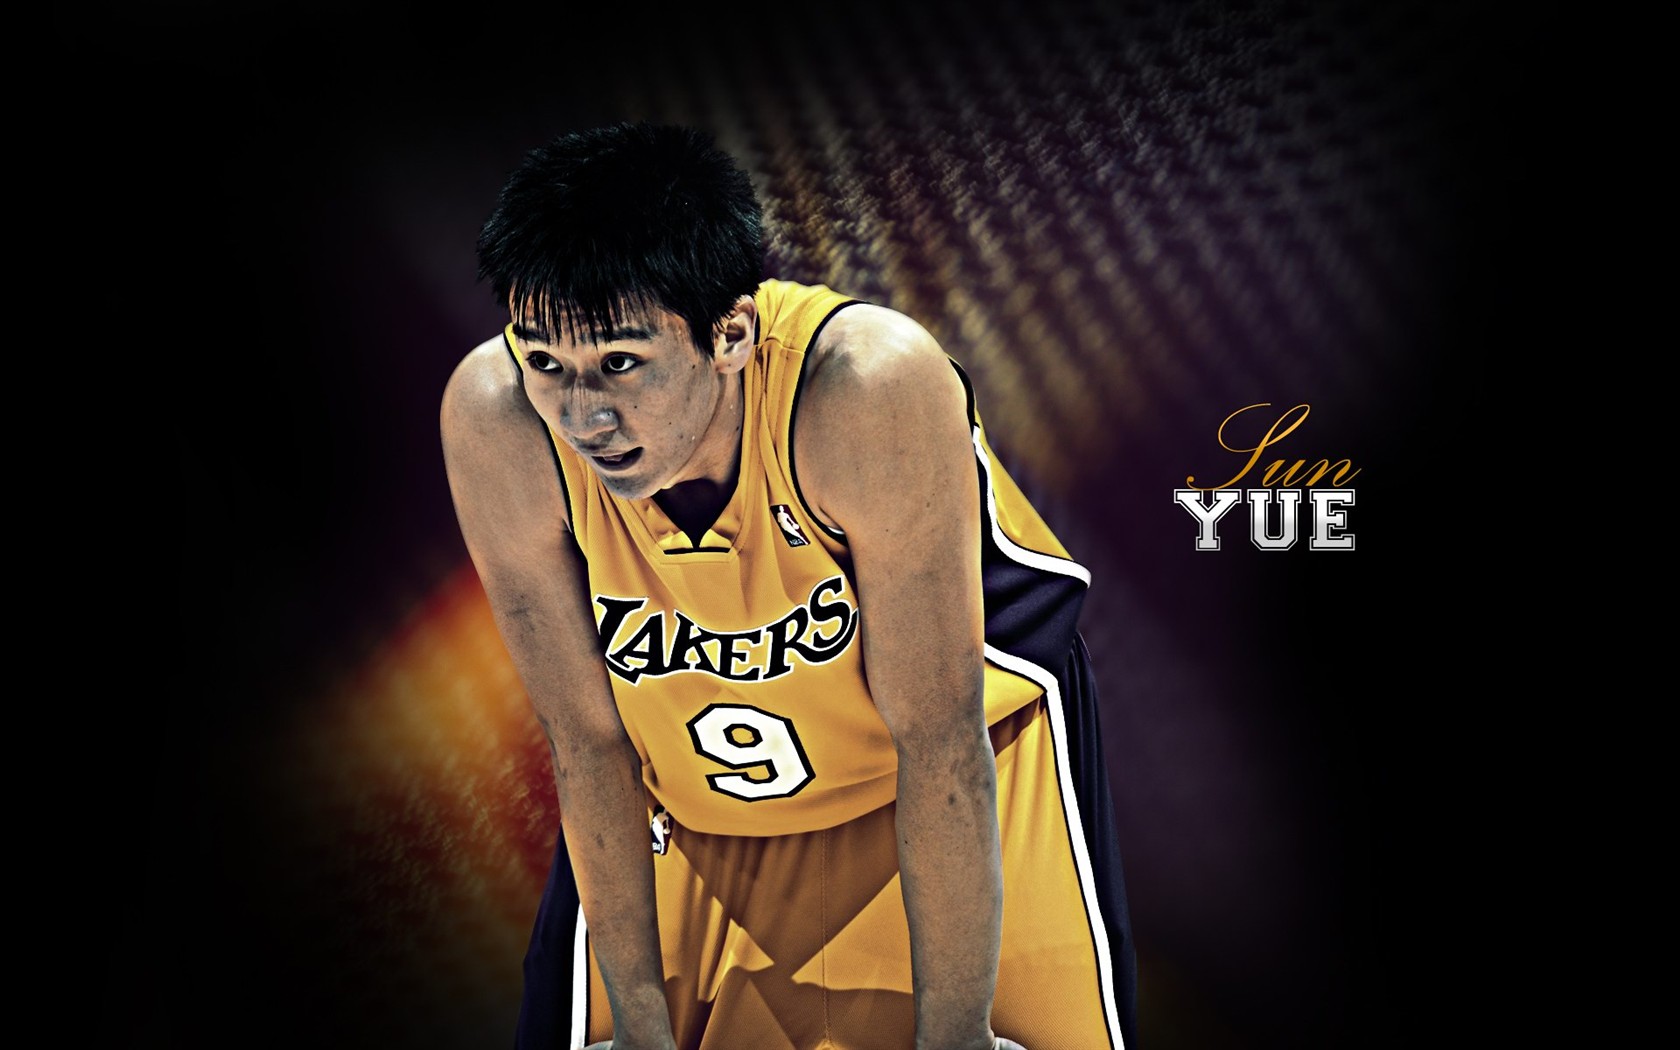 Los Angeles Lakers Official Wallpaper #24 - 1680x1050